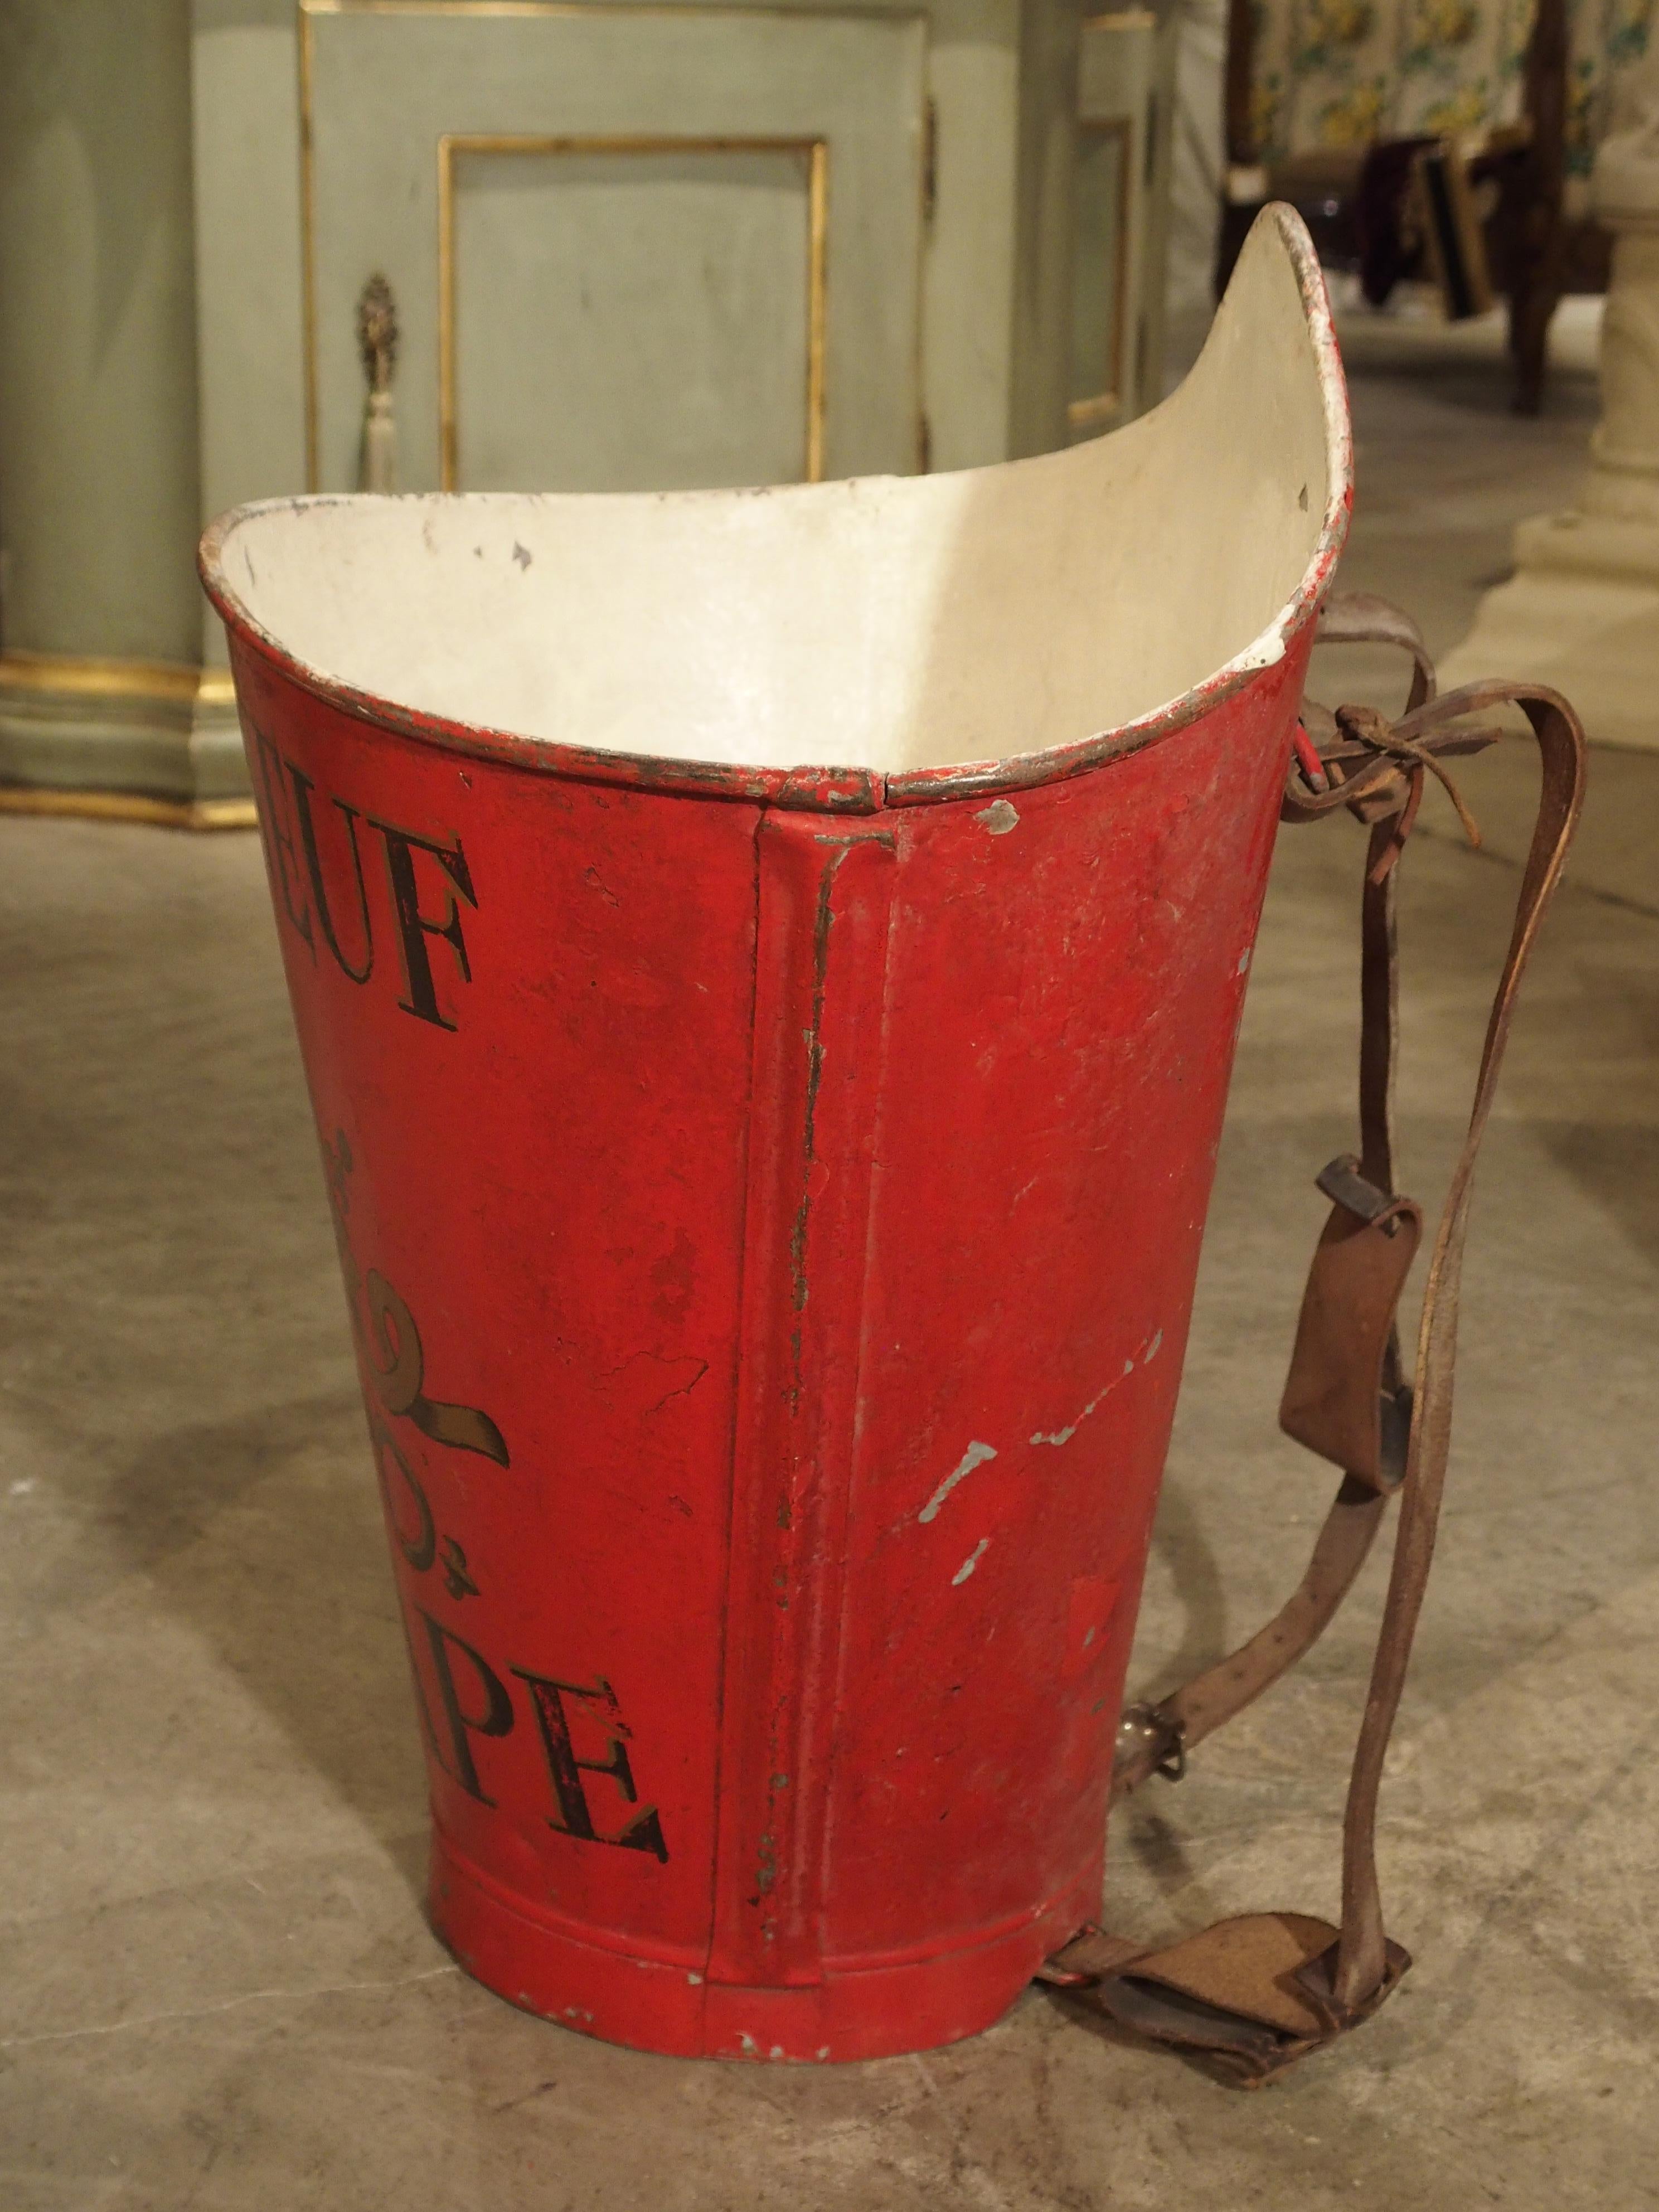 This colorful French metal container is known as an hotte. They were used for grape collecting in vineyards all over France during the 19th and early 20th centuries. This hotte has been painted with Chateauneuf du Pape and has an ornate central